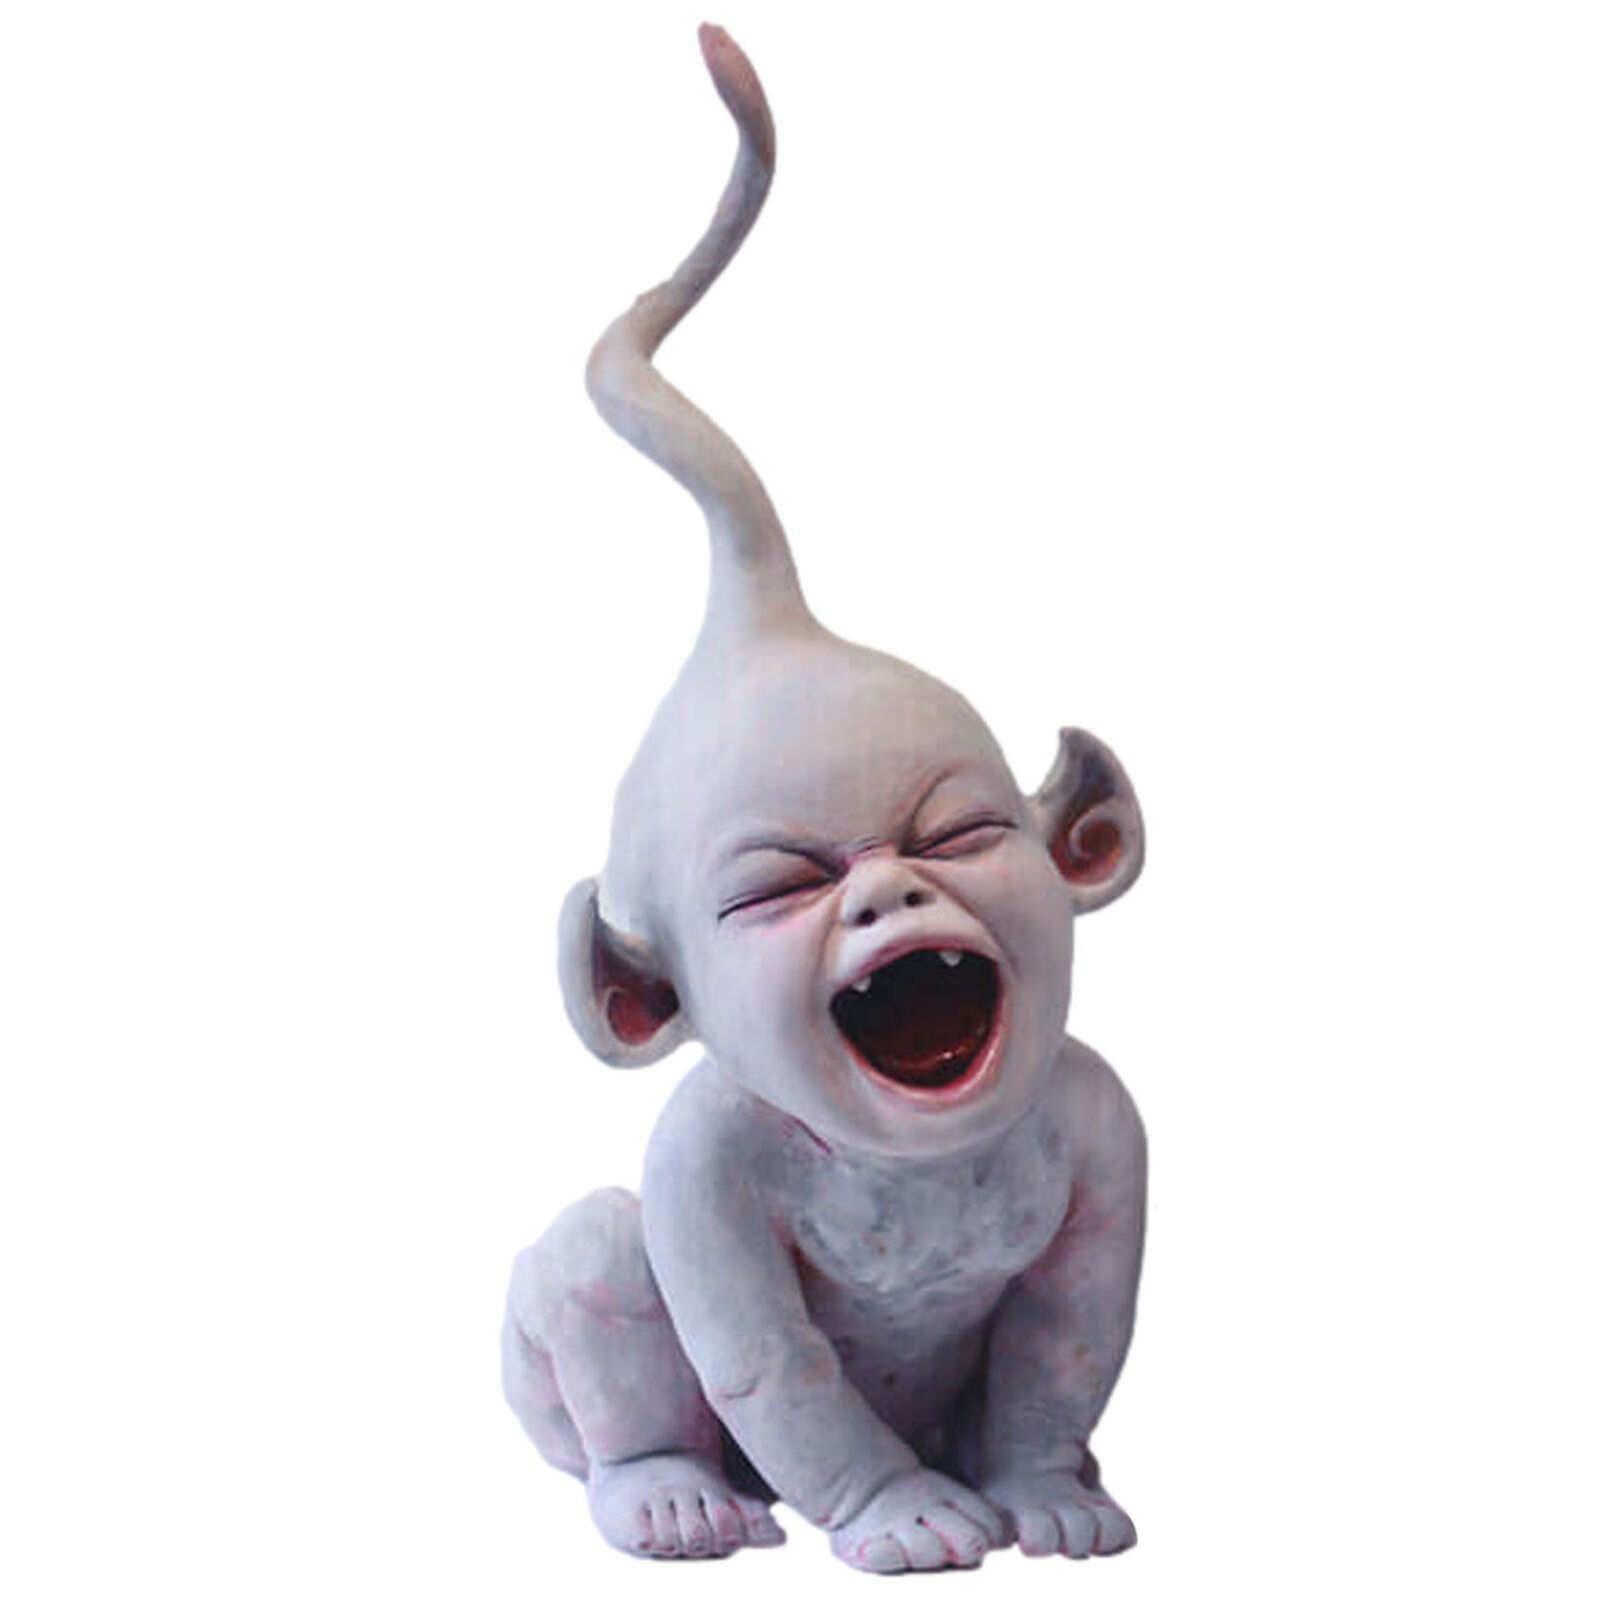 1Pc Horror Baby Zombie Resin Figure Statue Little Baby Devil From Hell Figurine